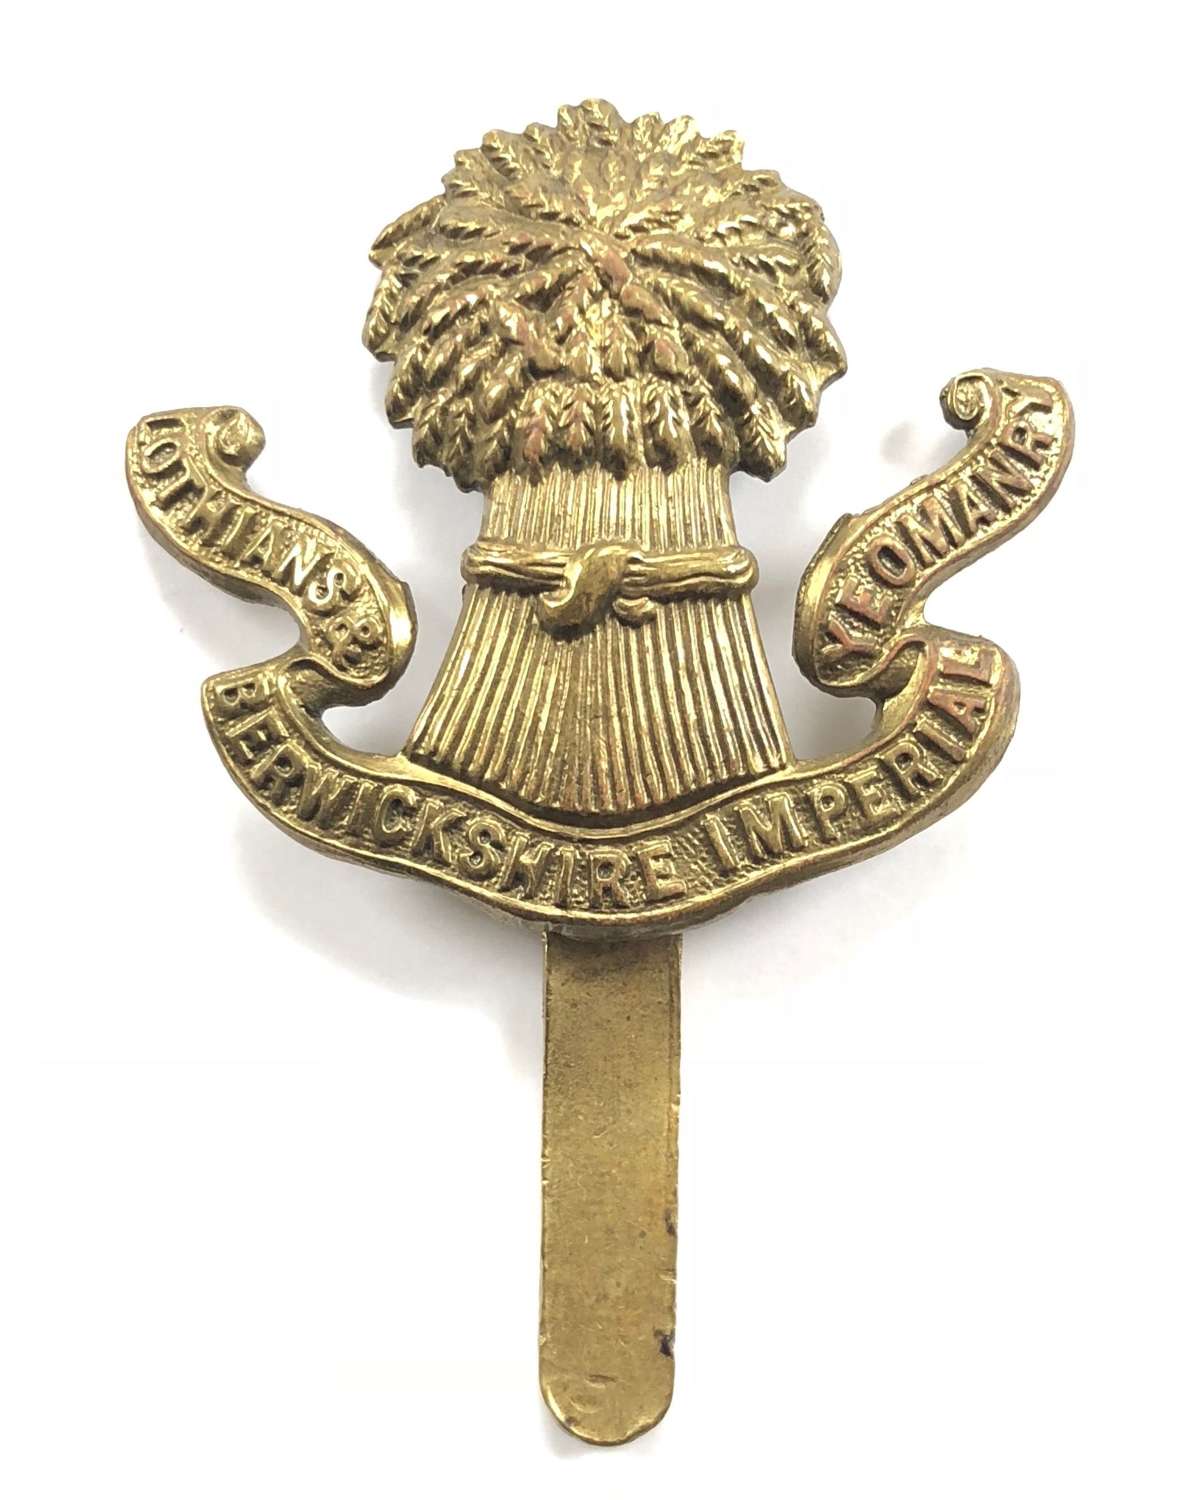 Lothians and Berwickshire Imperial Yeomanry OR’s cap badge